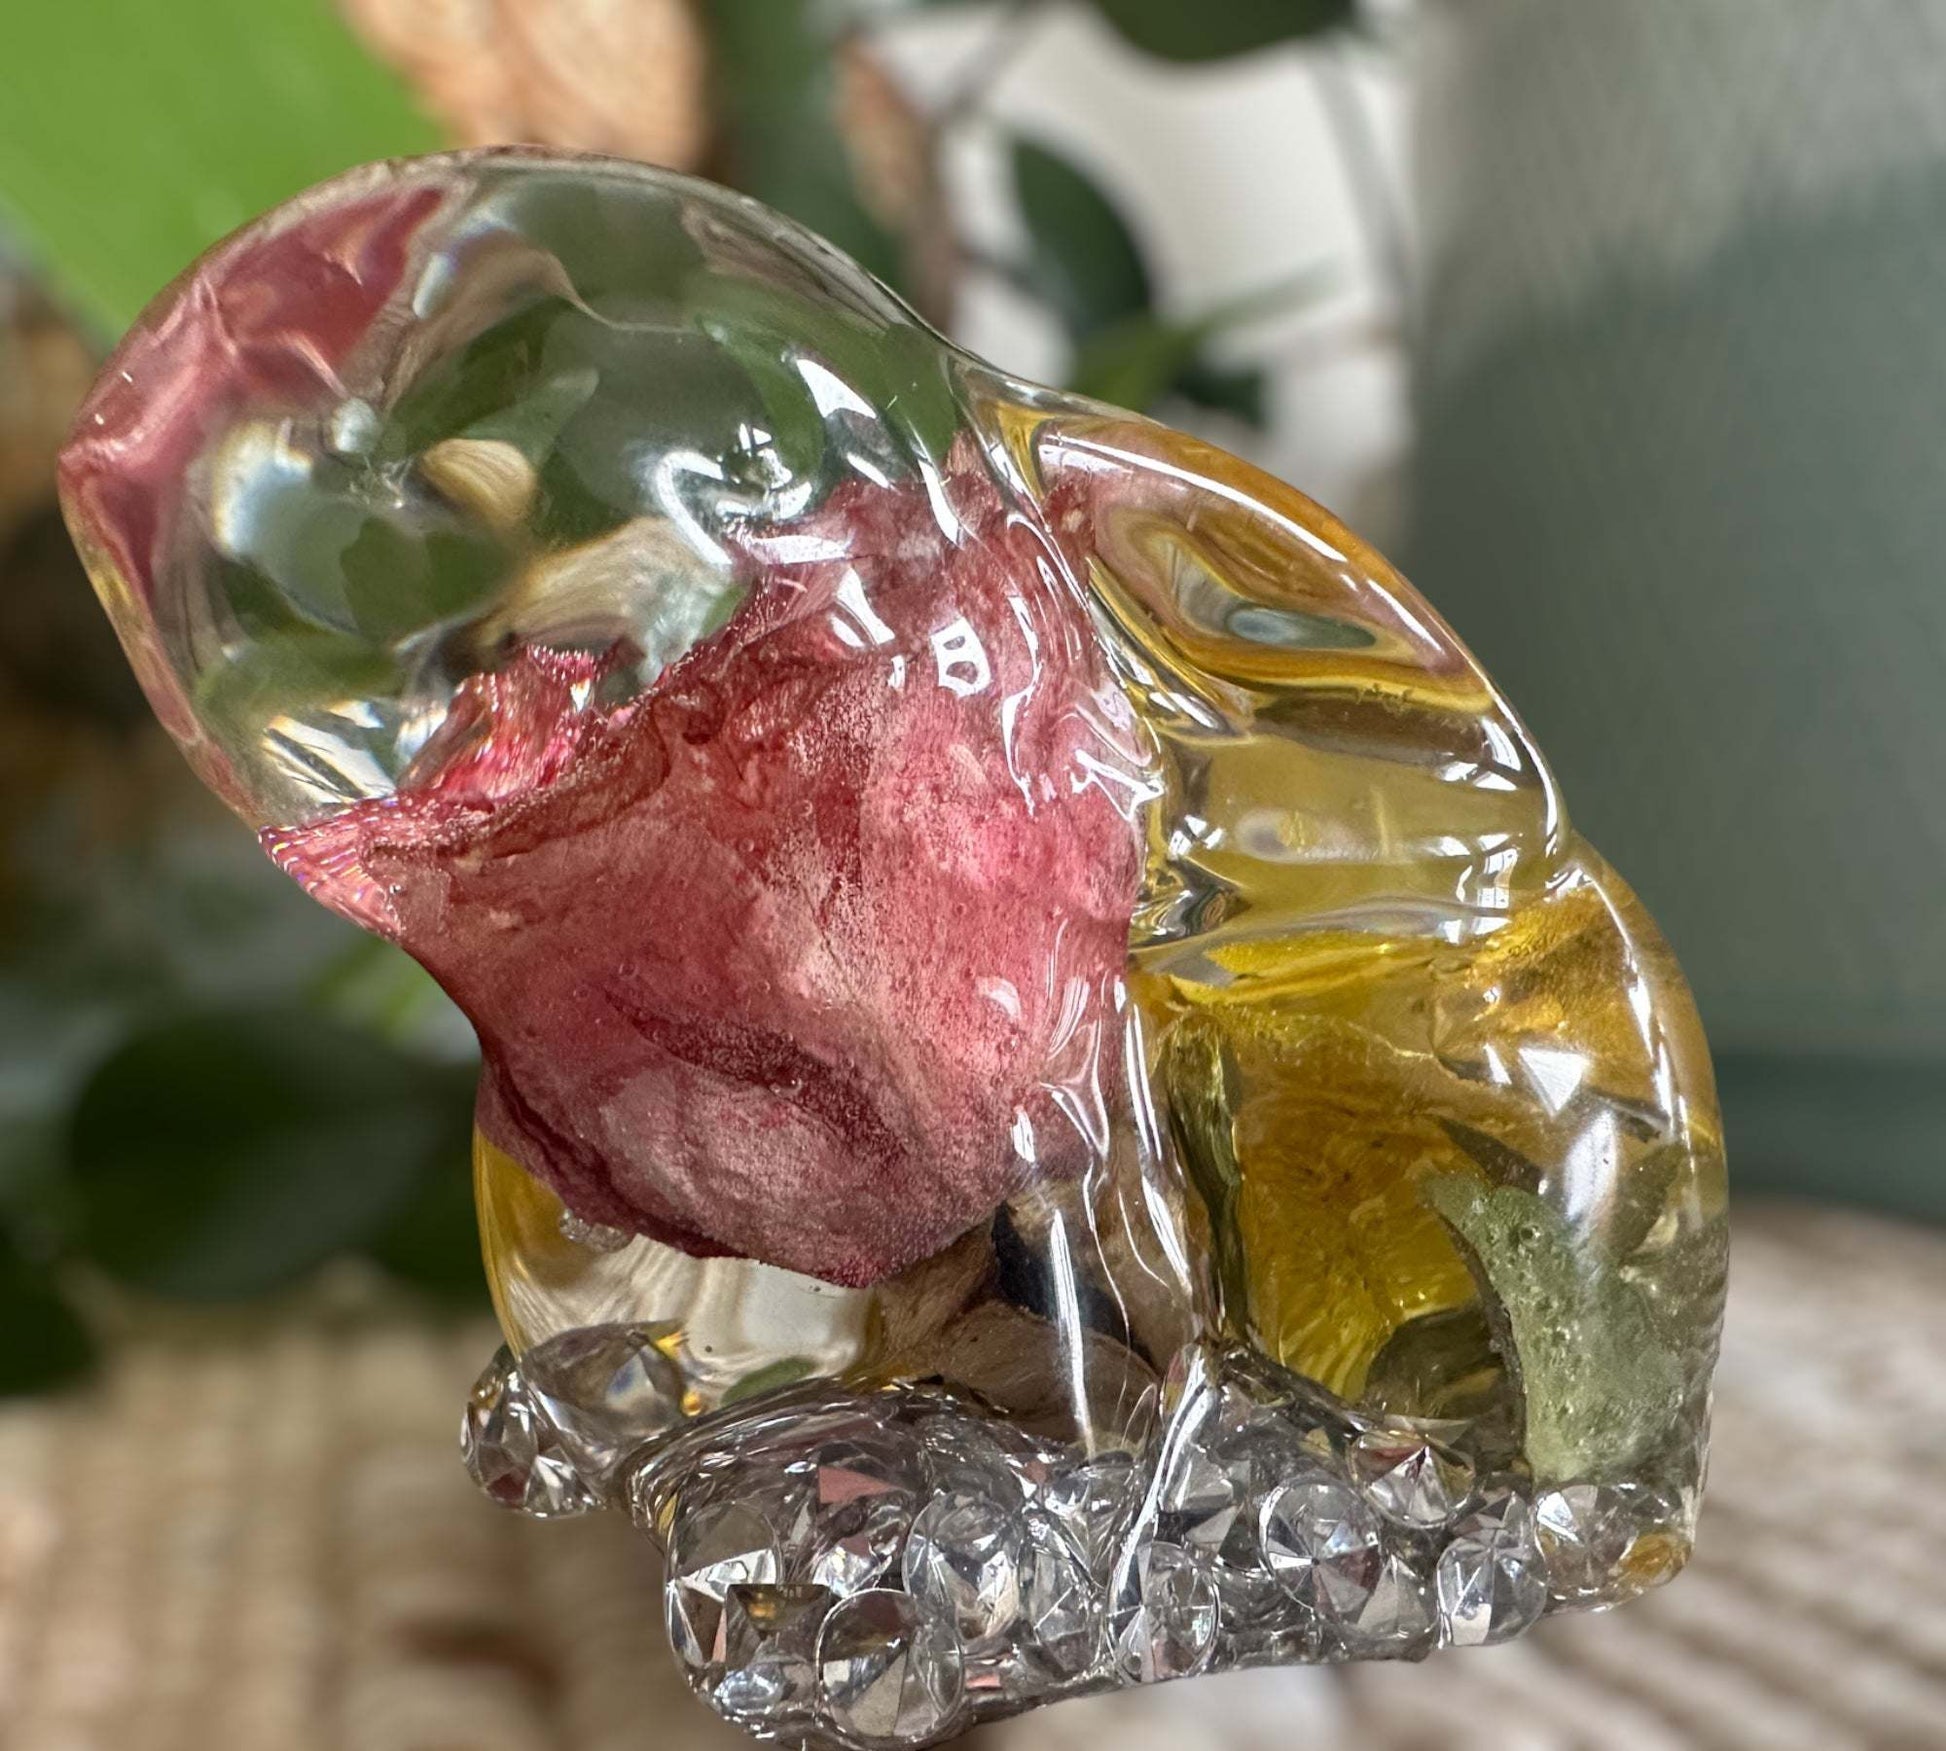 Floral Elegance: Resin Bunny Whimsical Home Decor with Dried Flowers